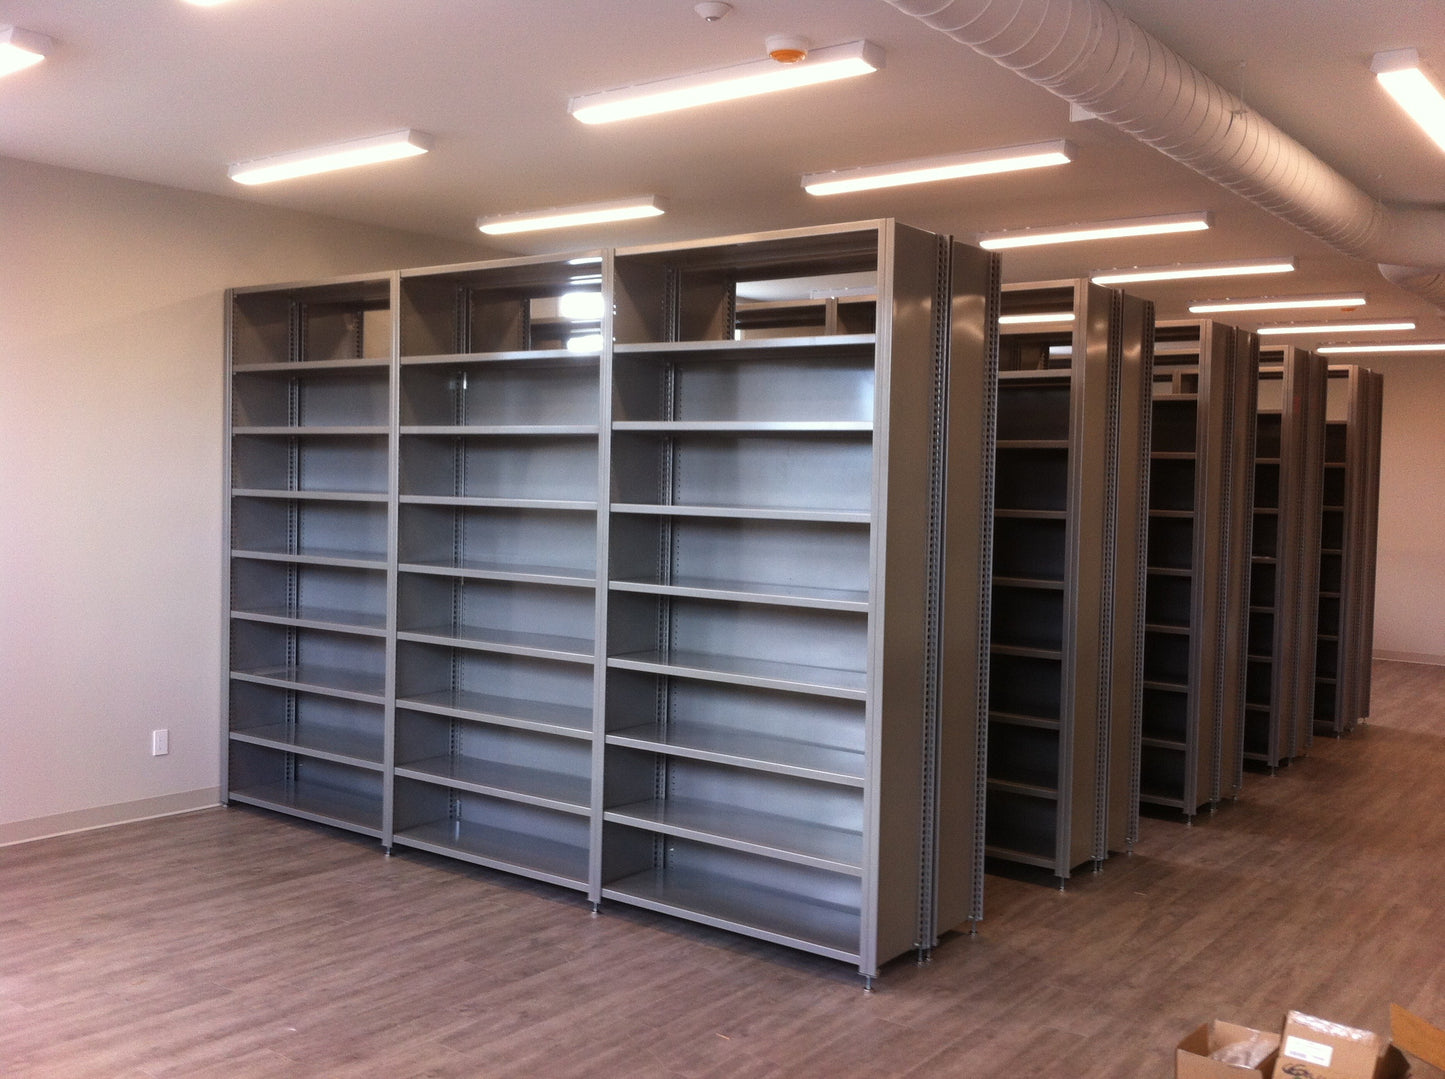 Shelving system 75 height x 48 width x 24 depth | Option: Open / Closed